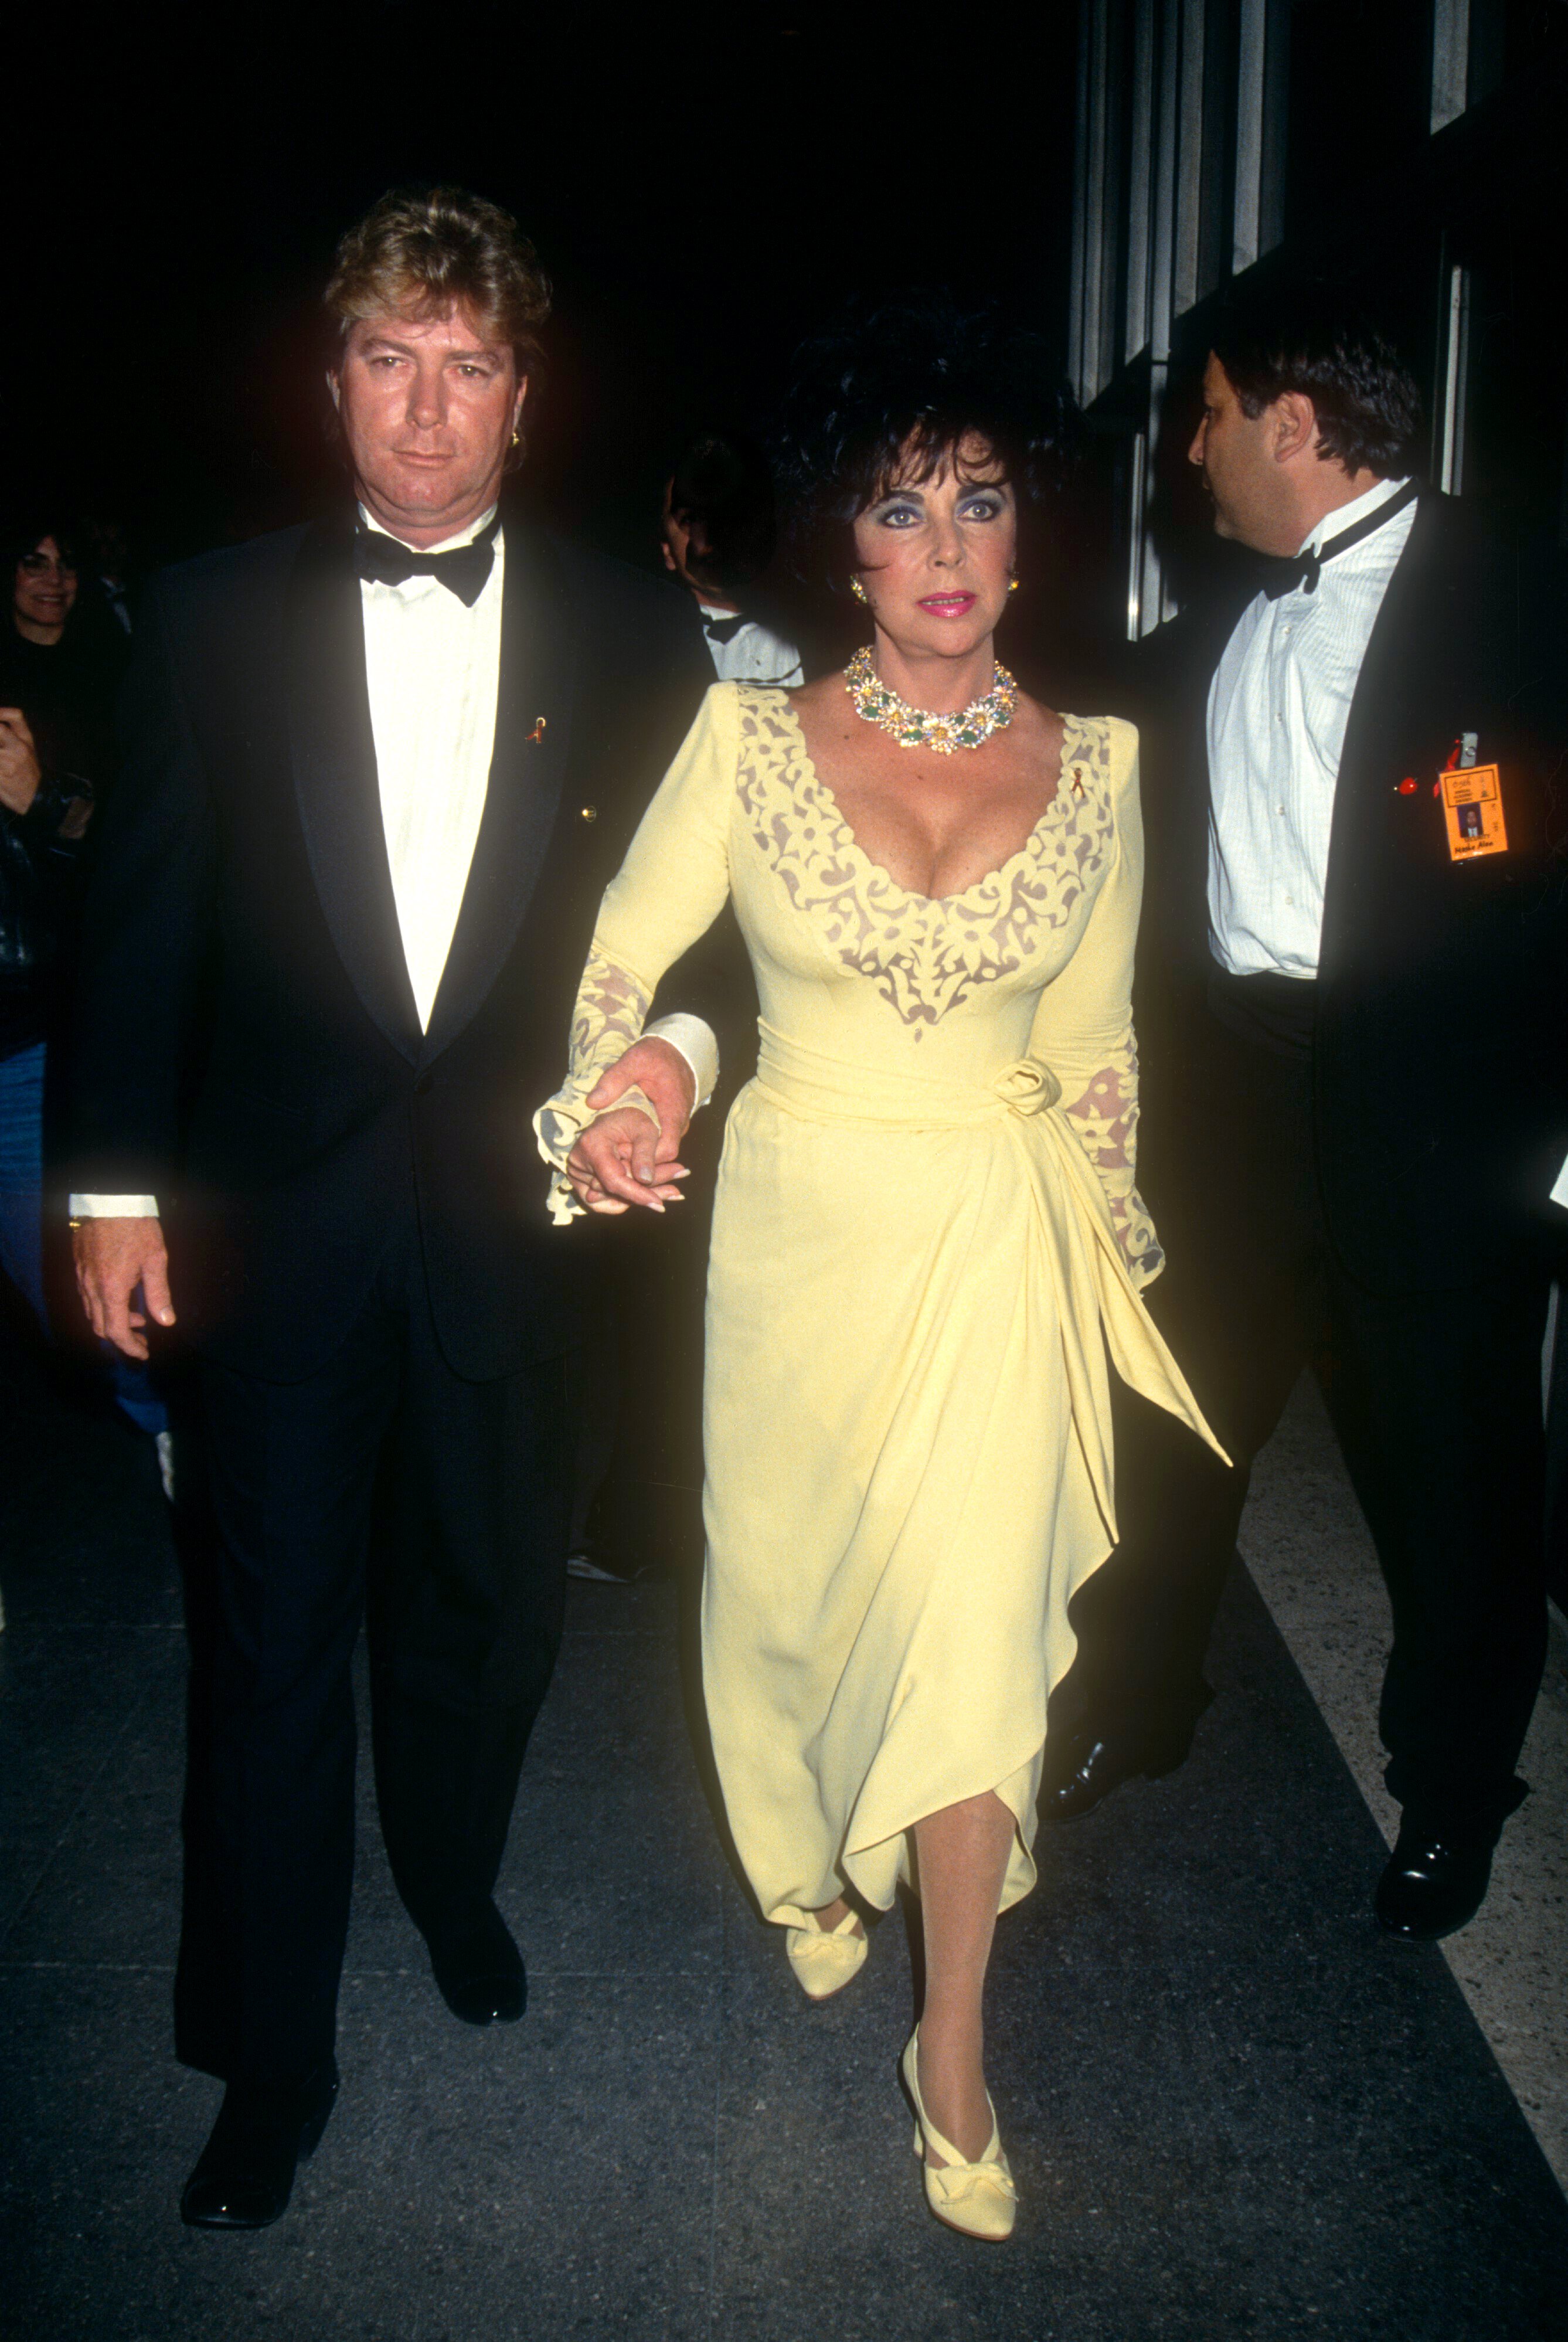  Larry Fortensky (1952-2016) and wife British-American actress Elizabeth Taylor (1932-2011) attend the 65th Annual Academy Awards at the Shrine Auditorium on March 29, 1993 in Los Angeles, California. | Source: Getty Images